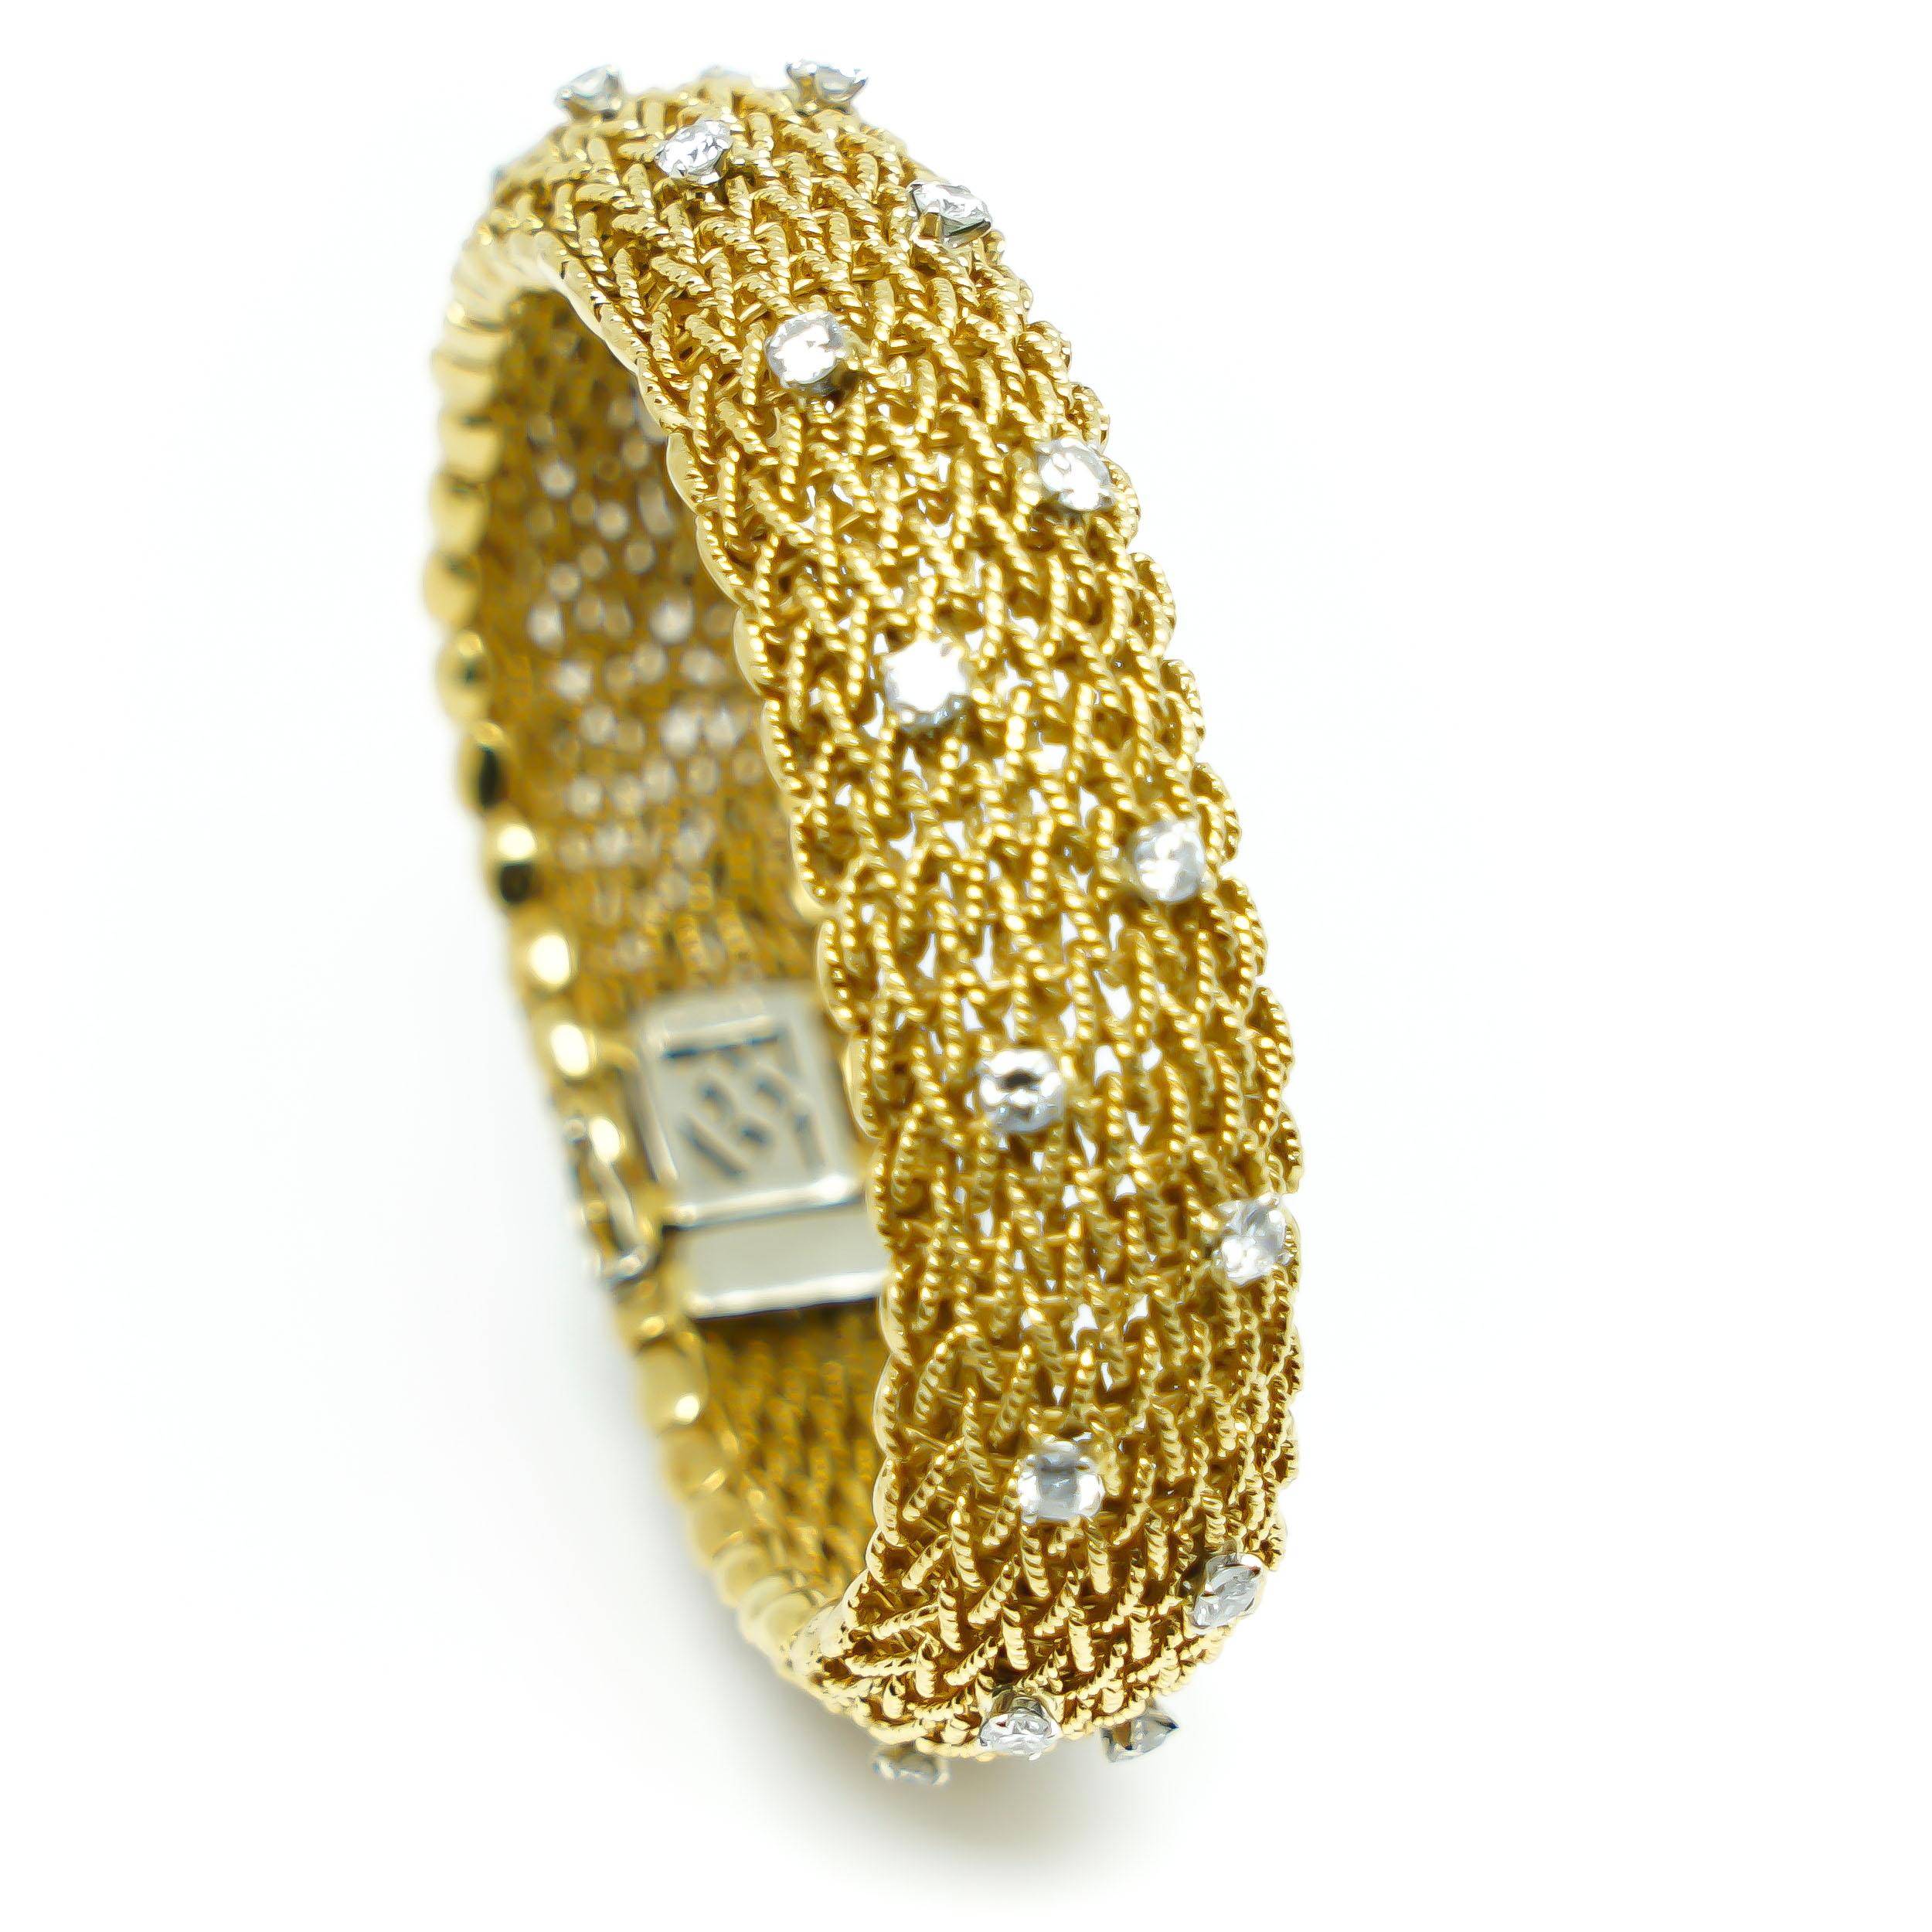 Bracelet  with  Diamonds in Knitted Gold 18 Karats. With a beautiful Liberty style of 60's It's a piece that has a strong and Original Design with a beautiful detailed structure totally Handcrafted that makes it Unique and a real Piece of Art to